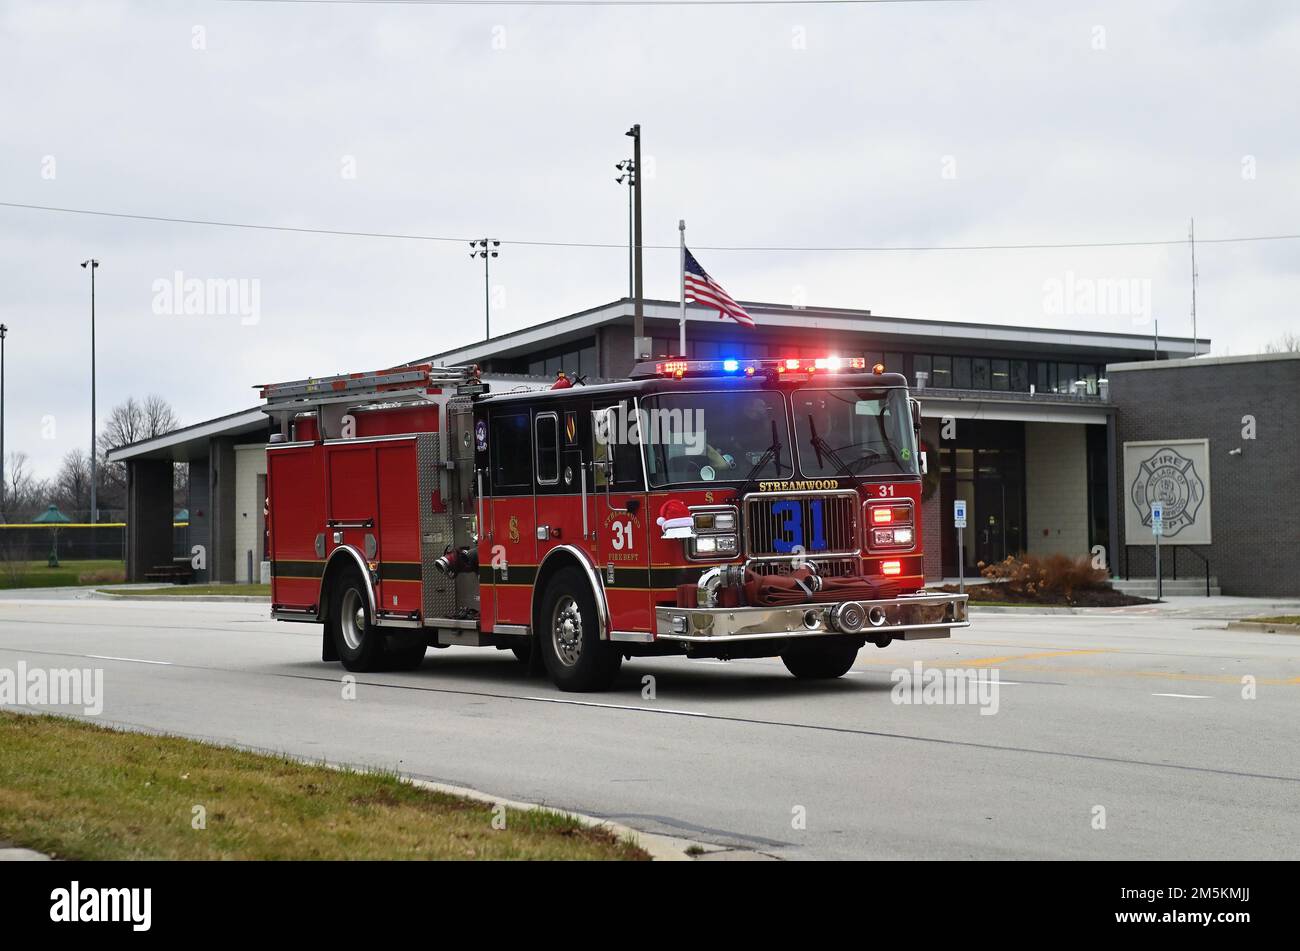 Streamwood, Illinois, USA. Fire truck or engine responding to a 911 fire call dispatched this unit to a suburban Chicago address. Stock Photo